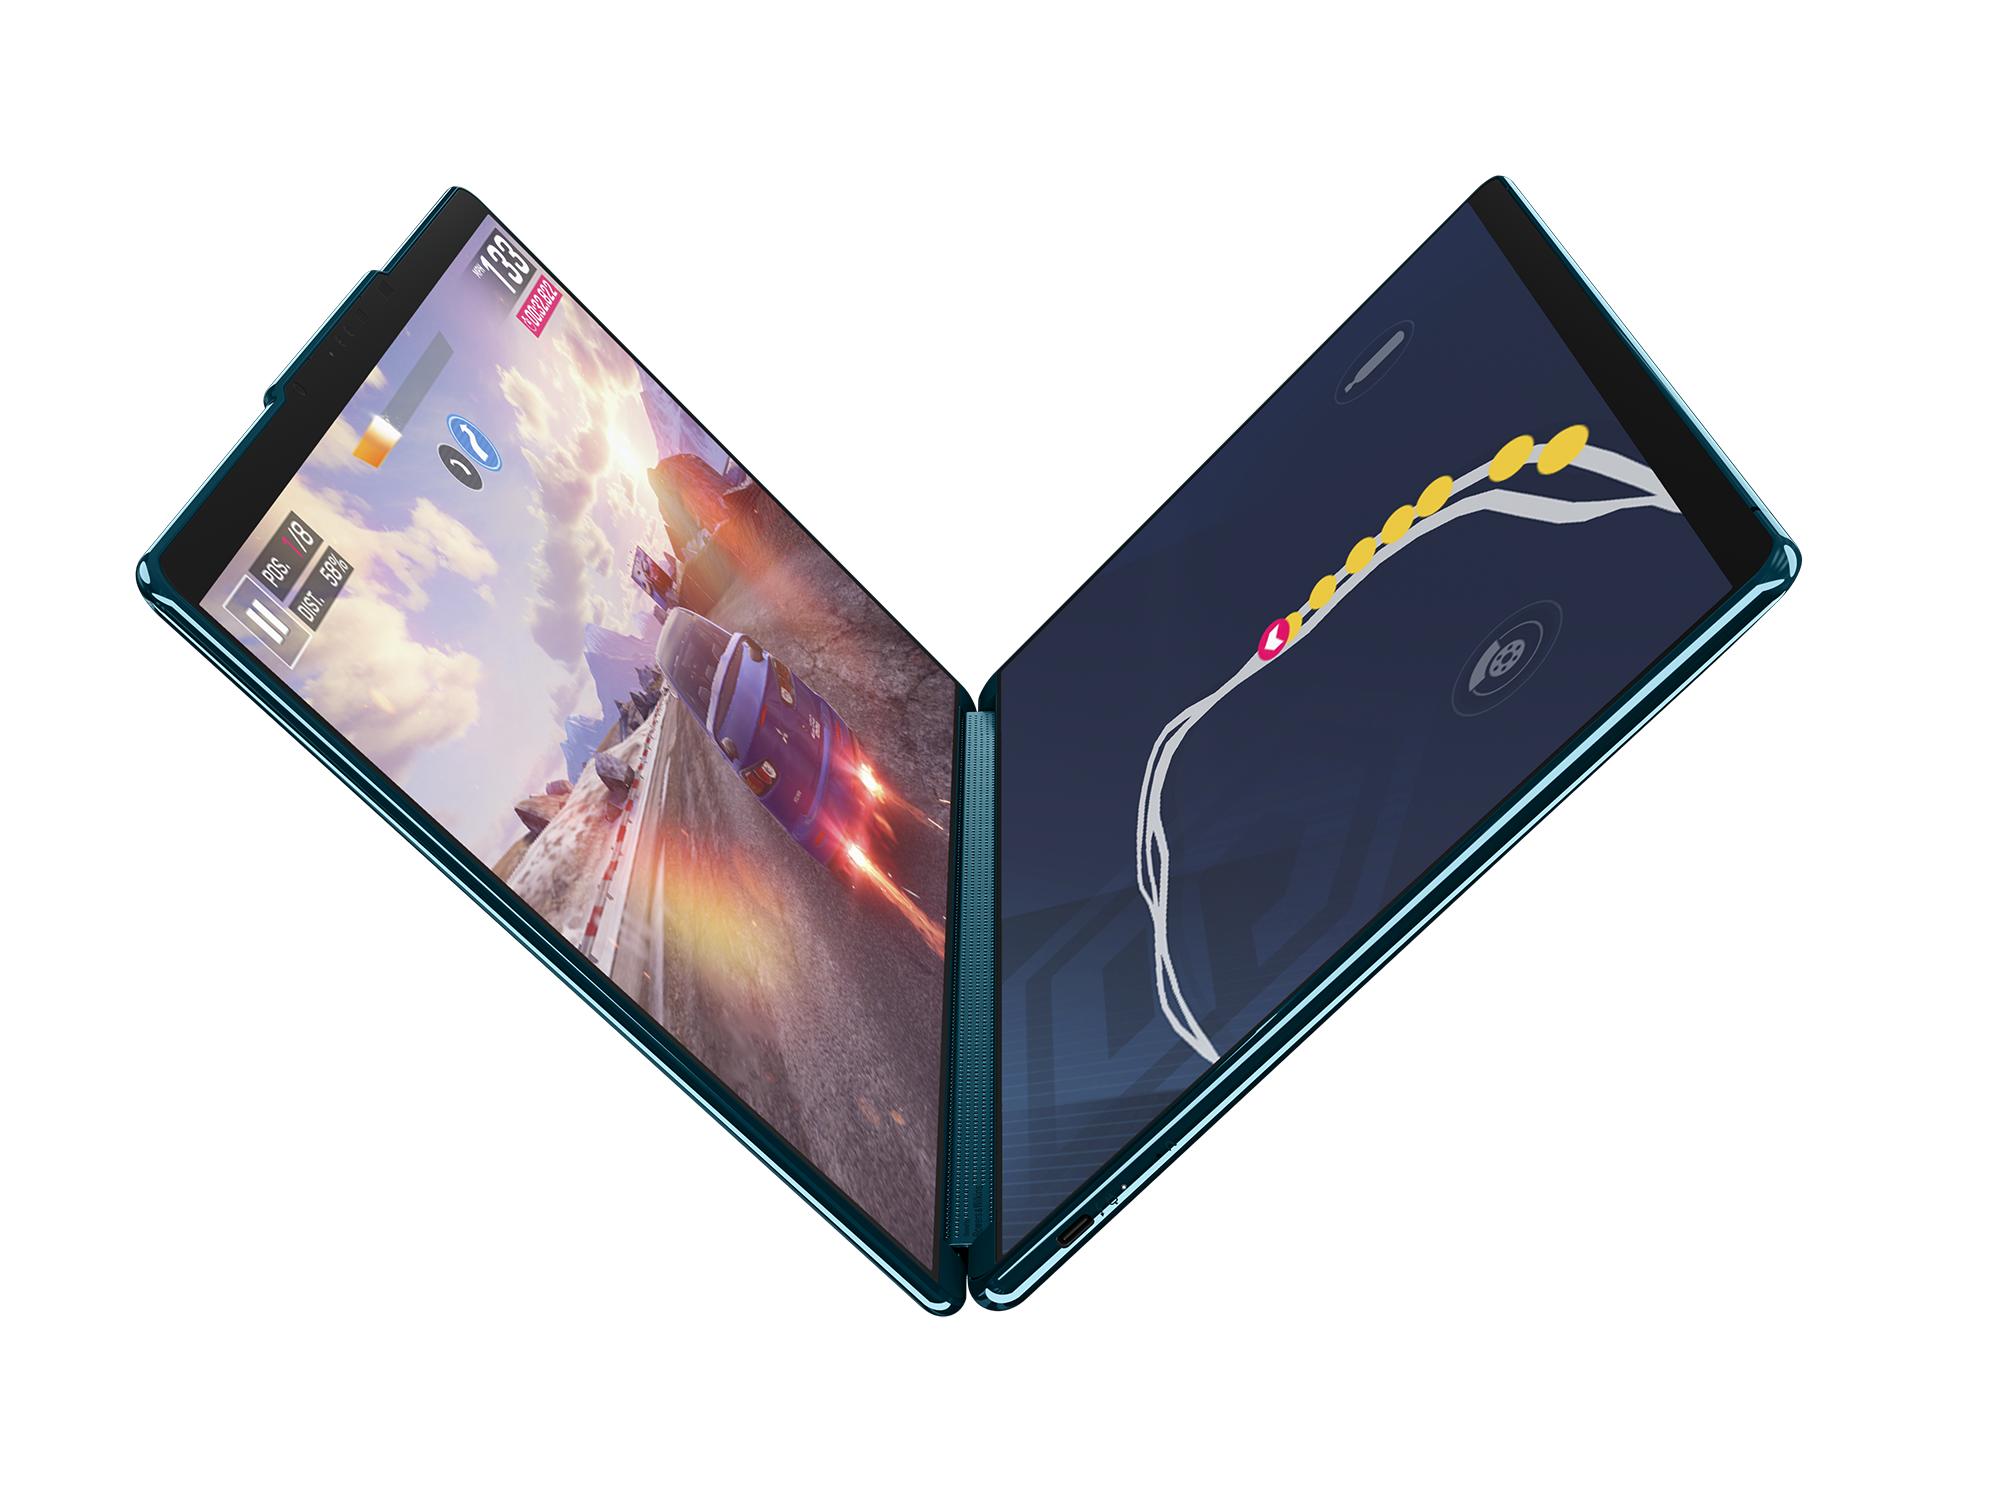 Lenovo Yoga Book 9i 13-inch thin and light convertible packs dual 2.8K OLED  touchscreens, Intel Raptor Lake-U processors and triple Thunderbolt 4  connectors -  News